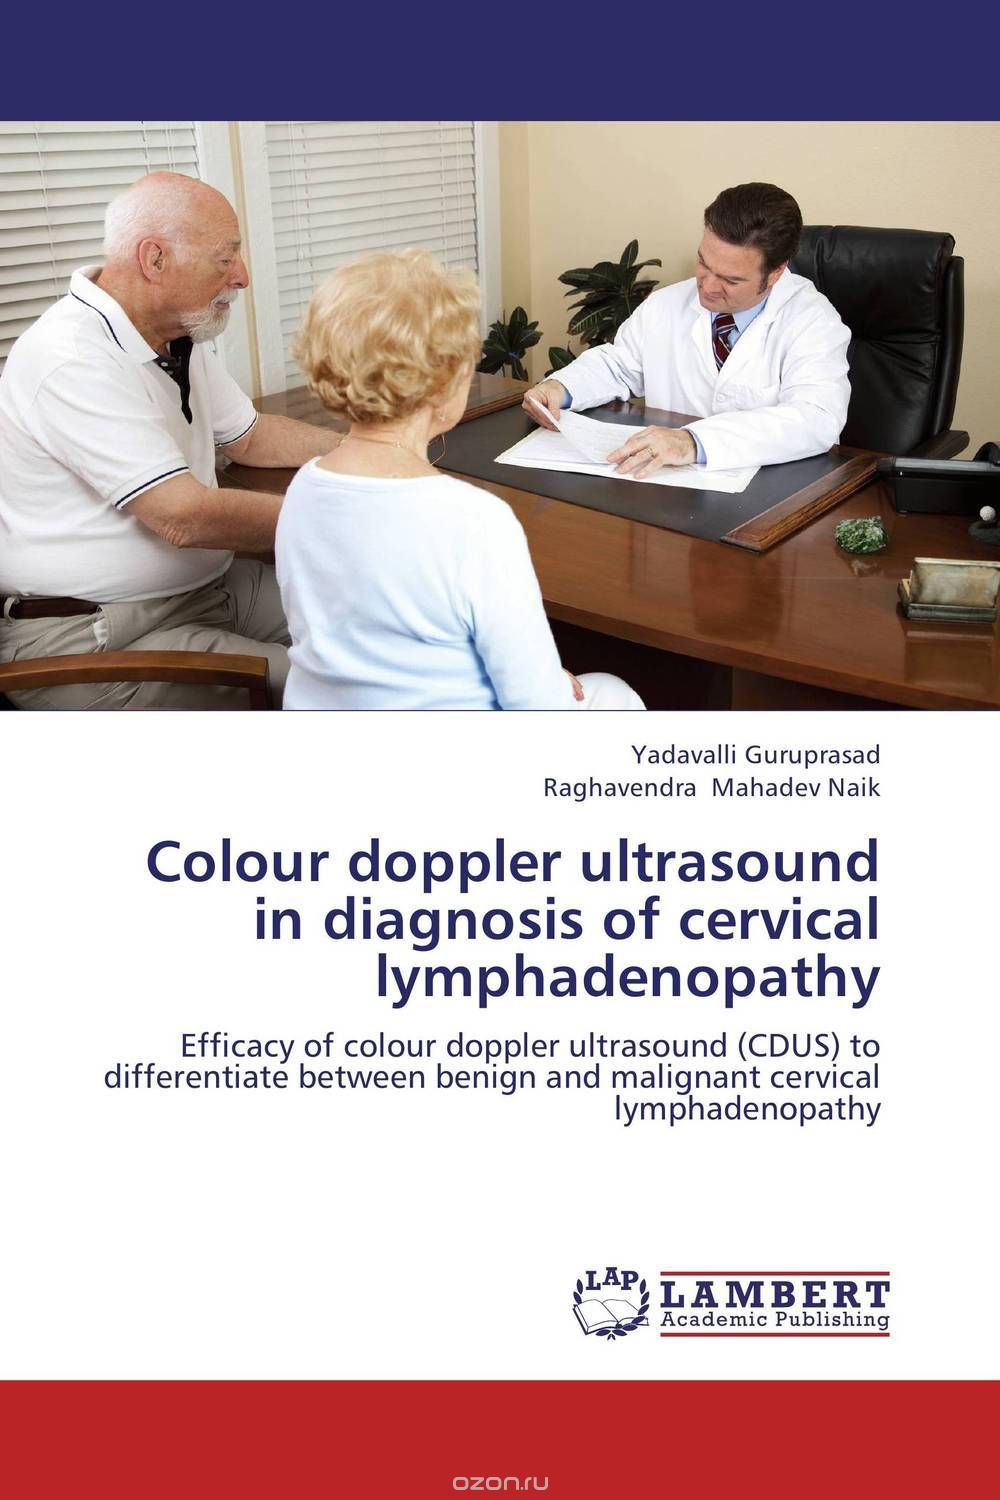 Colour doppler ultrasound in diagnosis of cervical lymphadenopathy